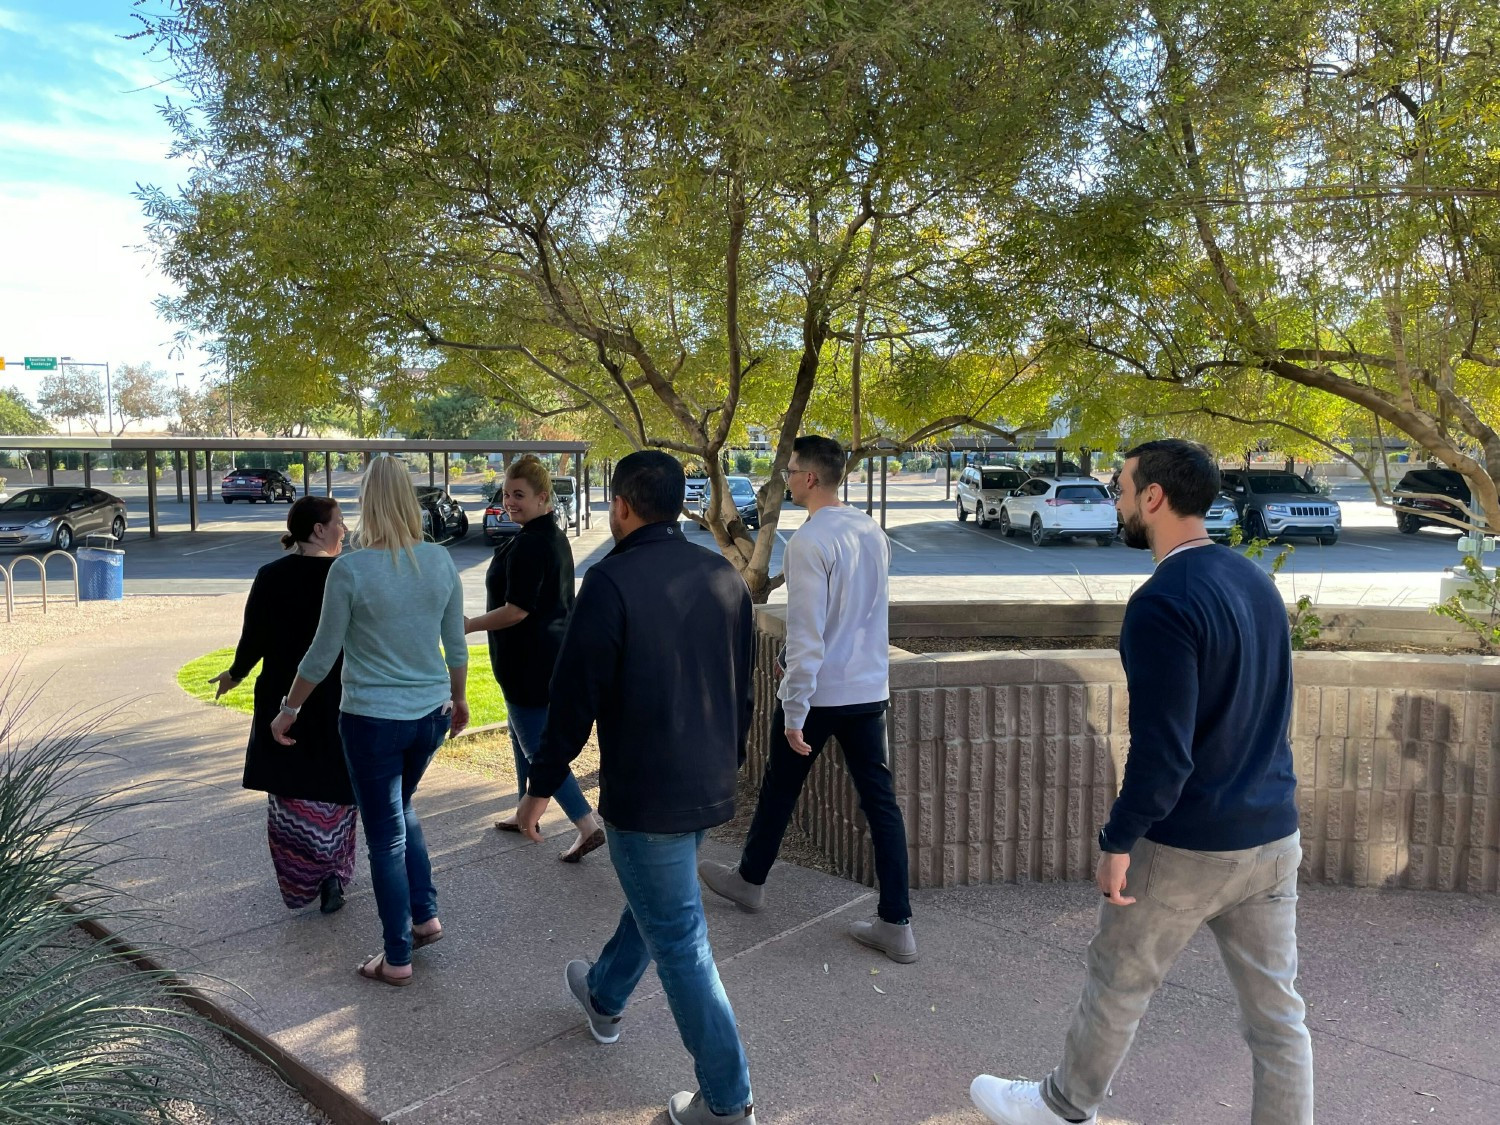 Our weekly walk and talk gives employees a chance to connect and enjoy the sunshine.